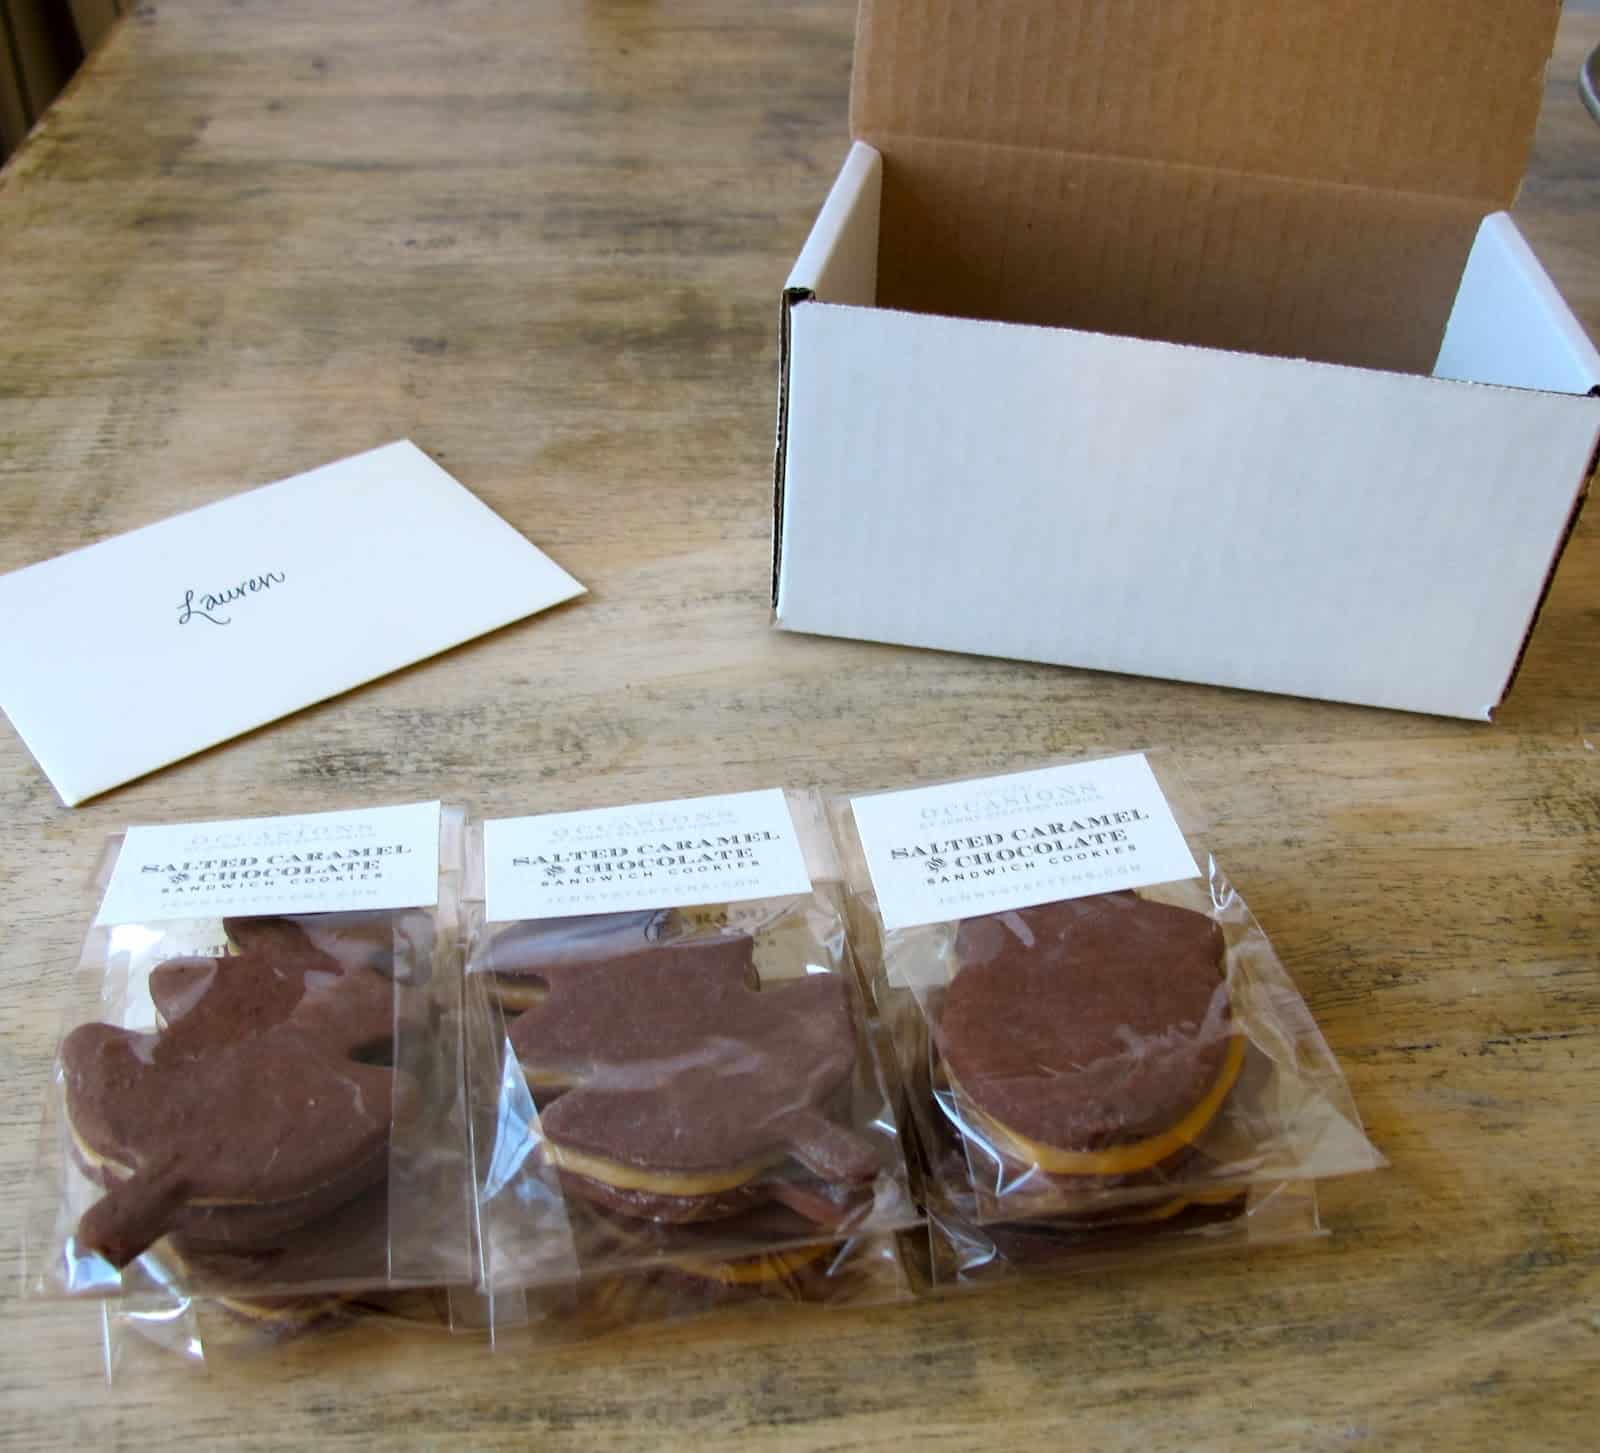 Jenny Steffens Hobick: Packaging Baked Goods in Your Kitchen